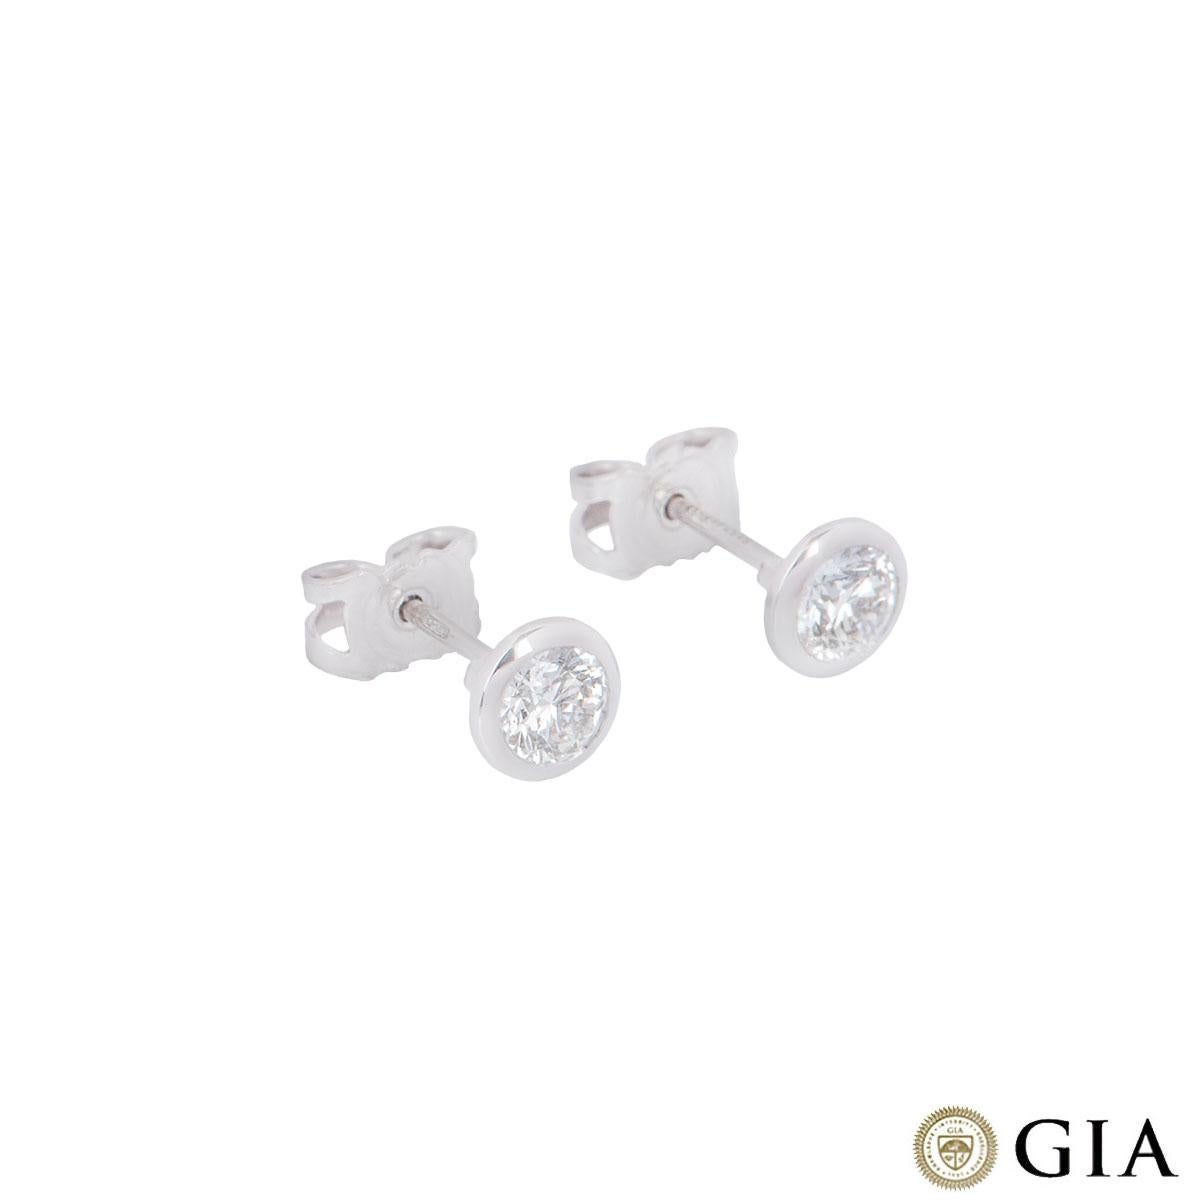 A stunning pair of 18k white gold diamond earrings. Each stud is set with a round brilliant cut diamond in a rubover setting. The first diamond has a weight of 0.37ct and the second weighs 0.38ct, both F colour and VS1 in clarity. The diamonds both